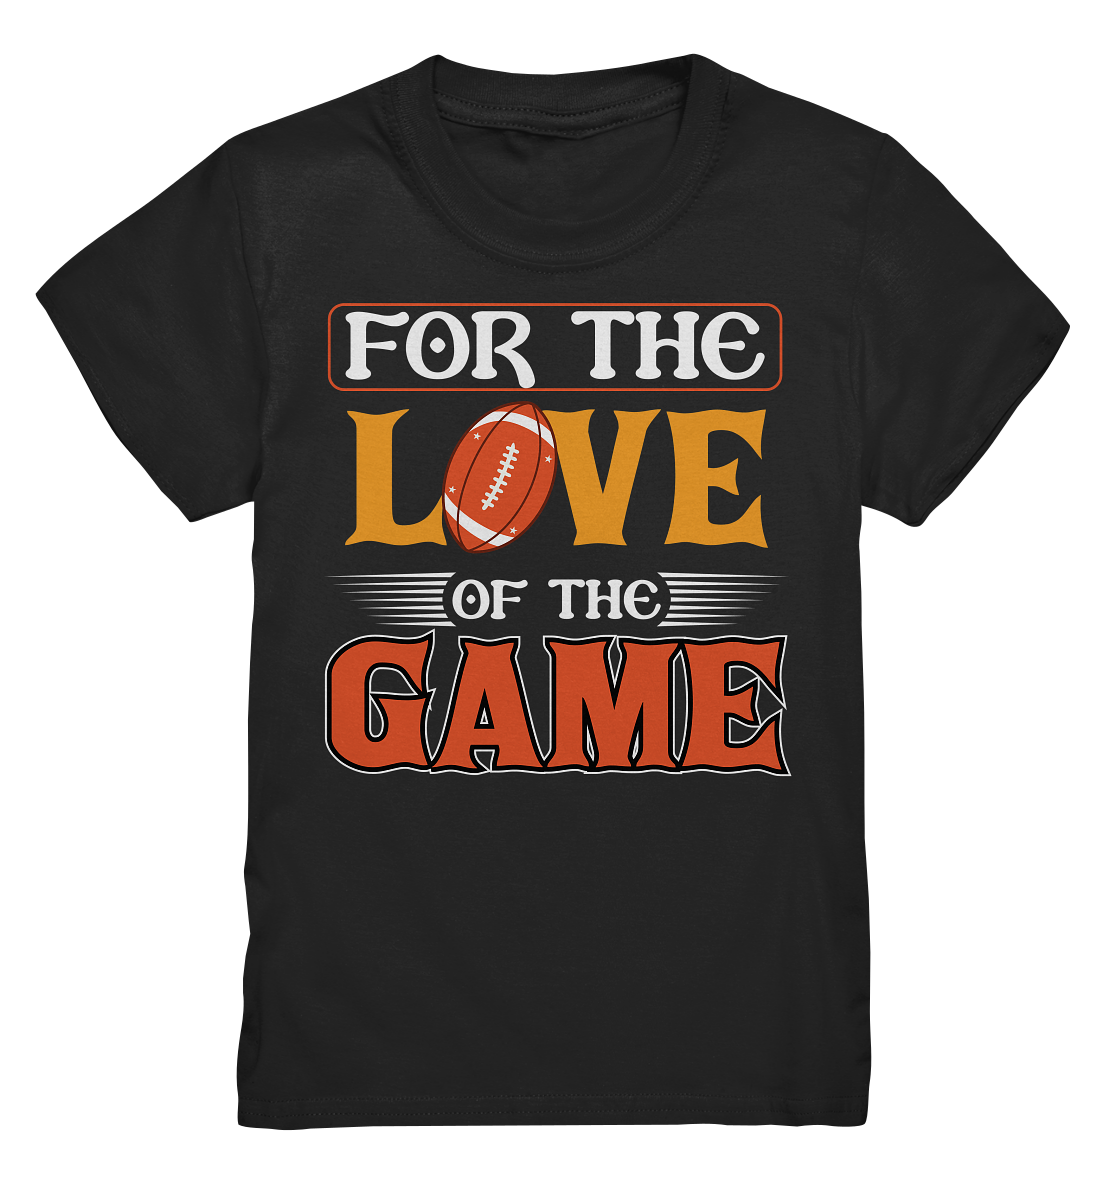 For the Love of the Game - Kids Premium Shirt - Football Unity Football Unity